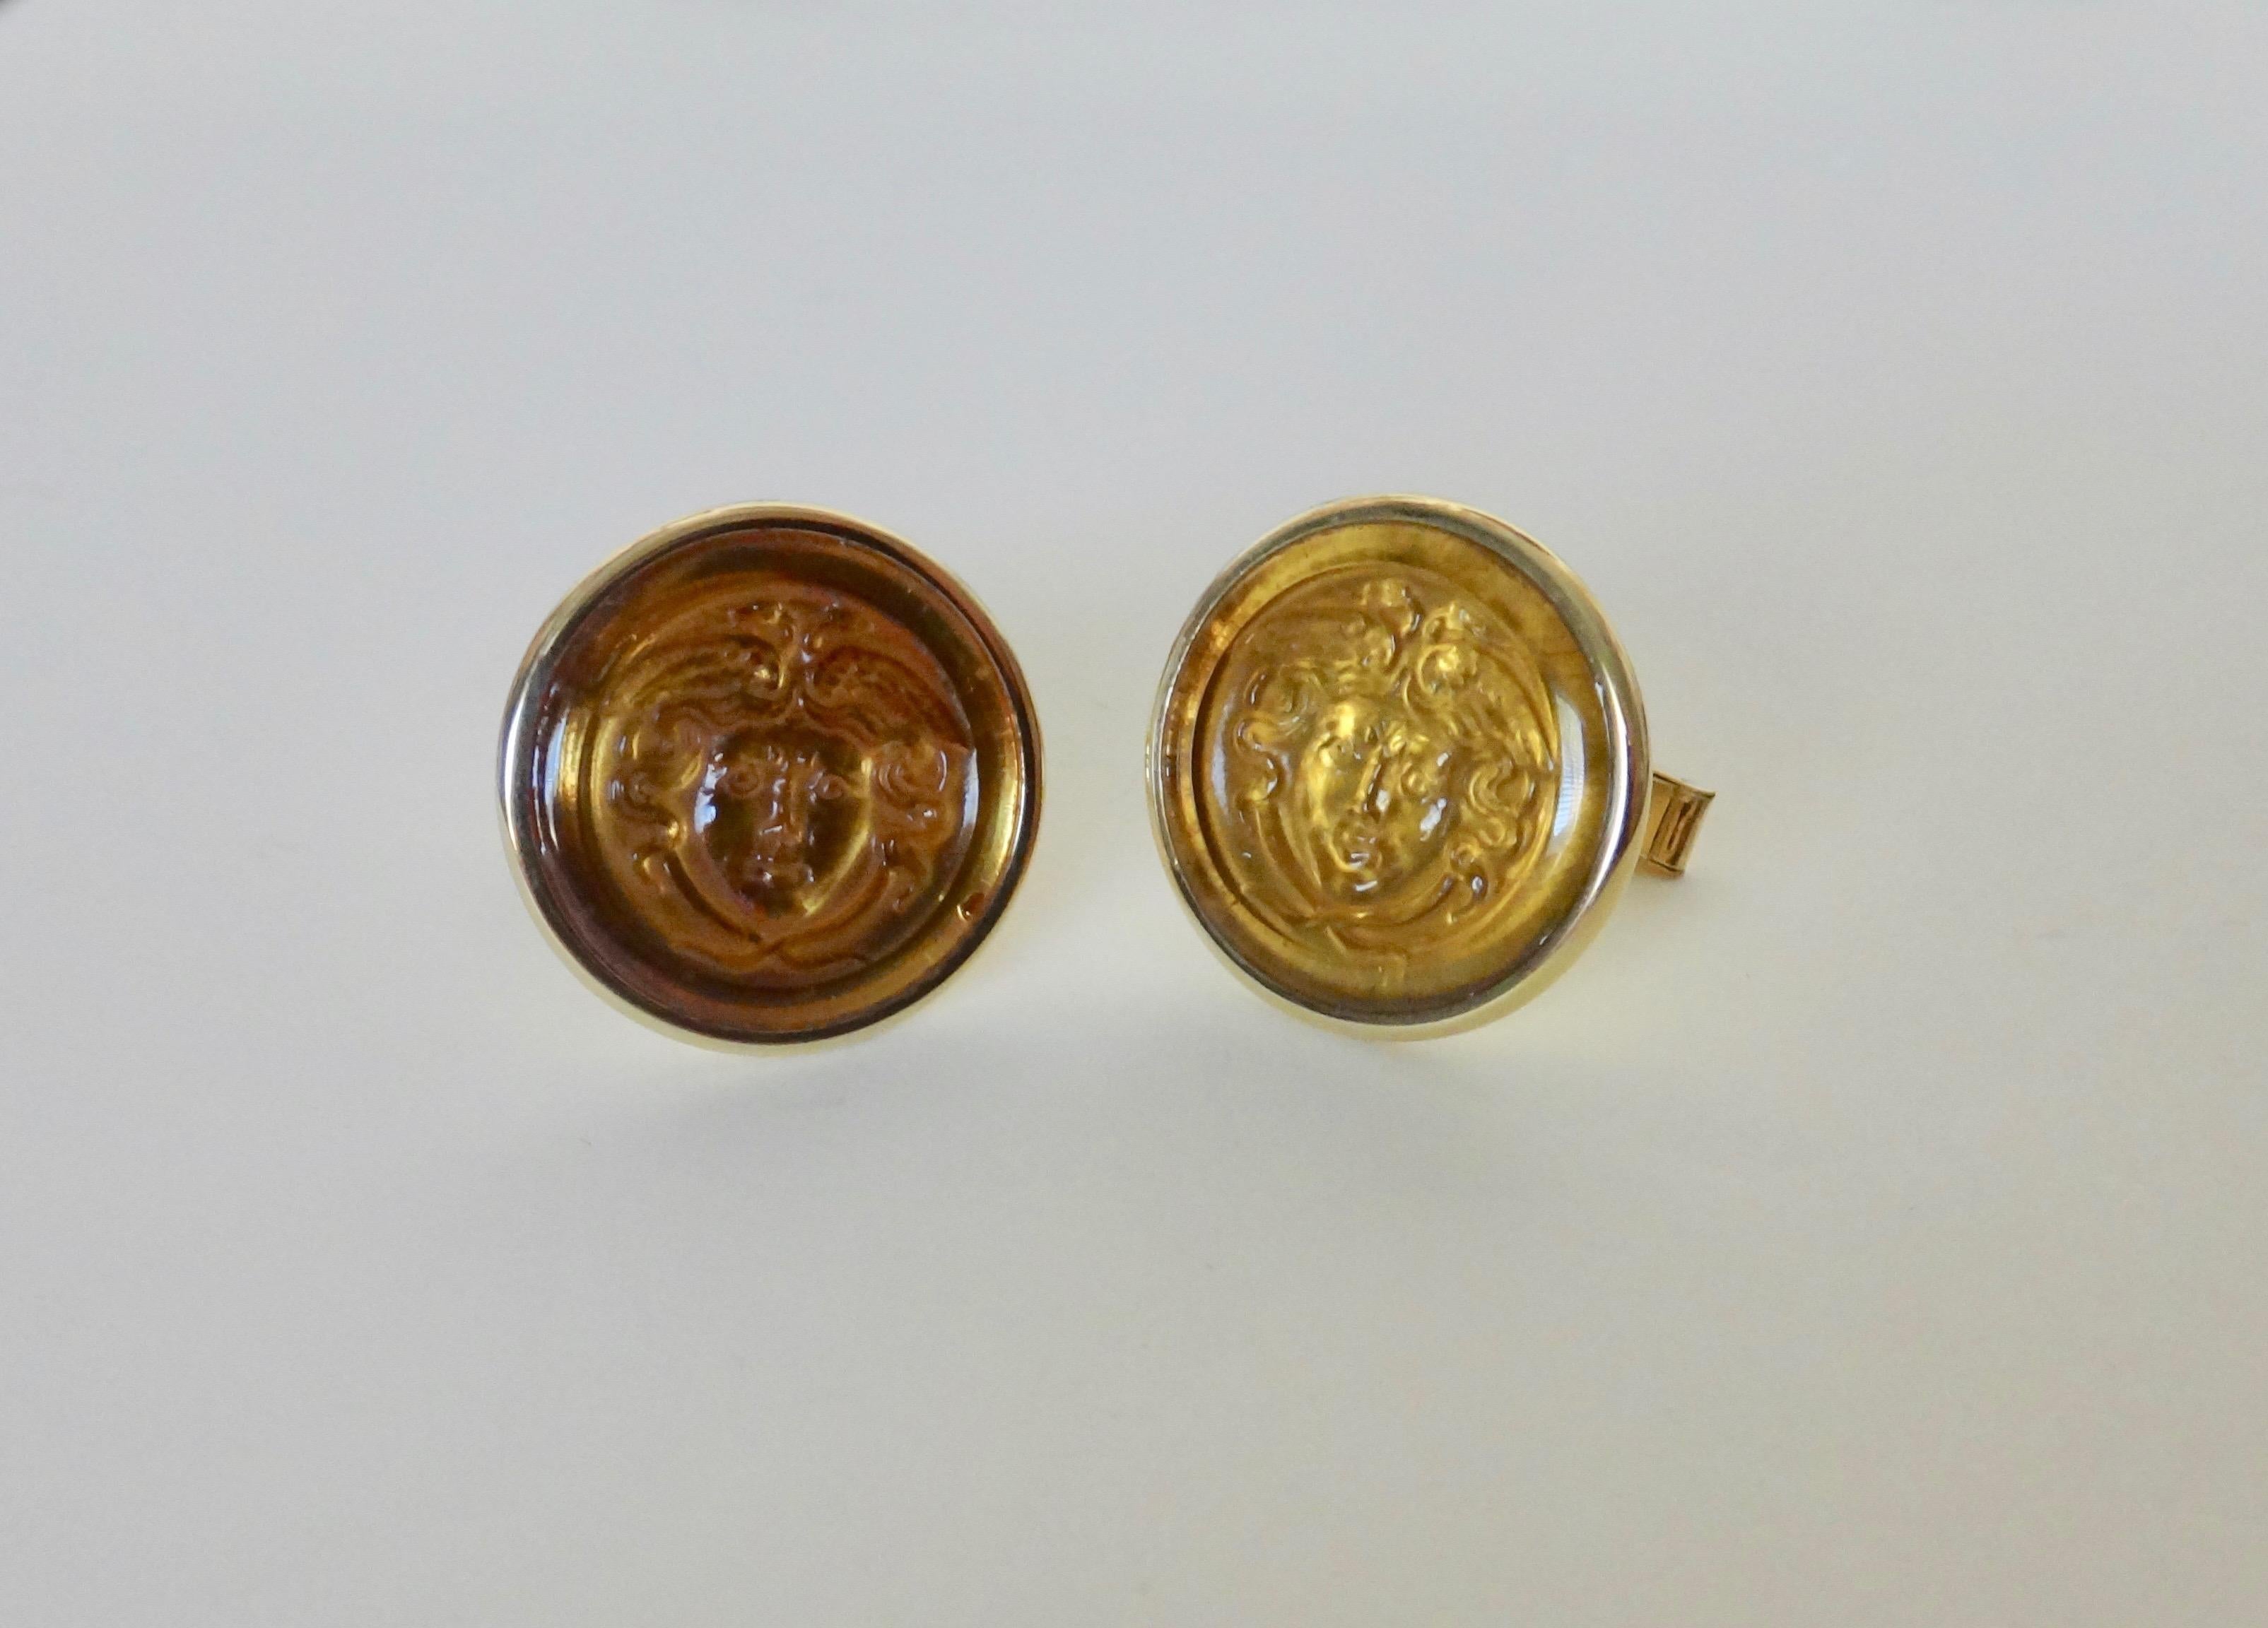 Carved in Germany, a classically sculpted pair of citrine Medusa head cameos are featured in these one-of-a-kind 18k yellow gold cuff links.  Sleek and time-honored, the pair are the perfect gift for the discriminating gentleman.  